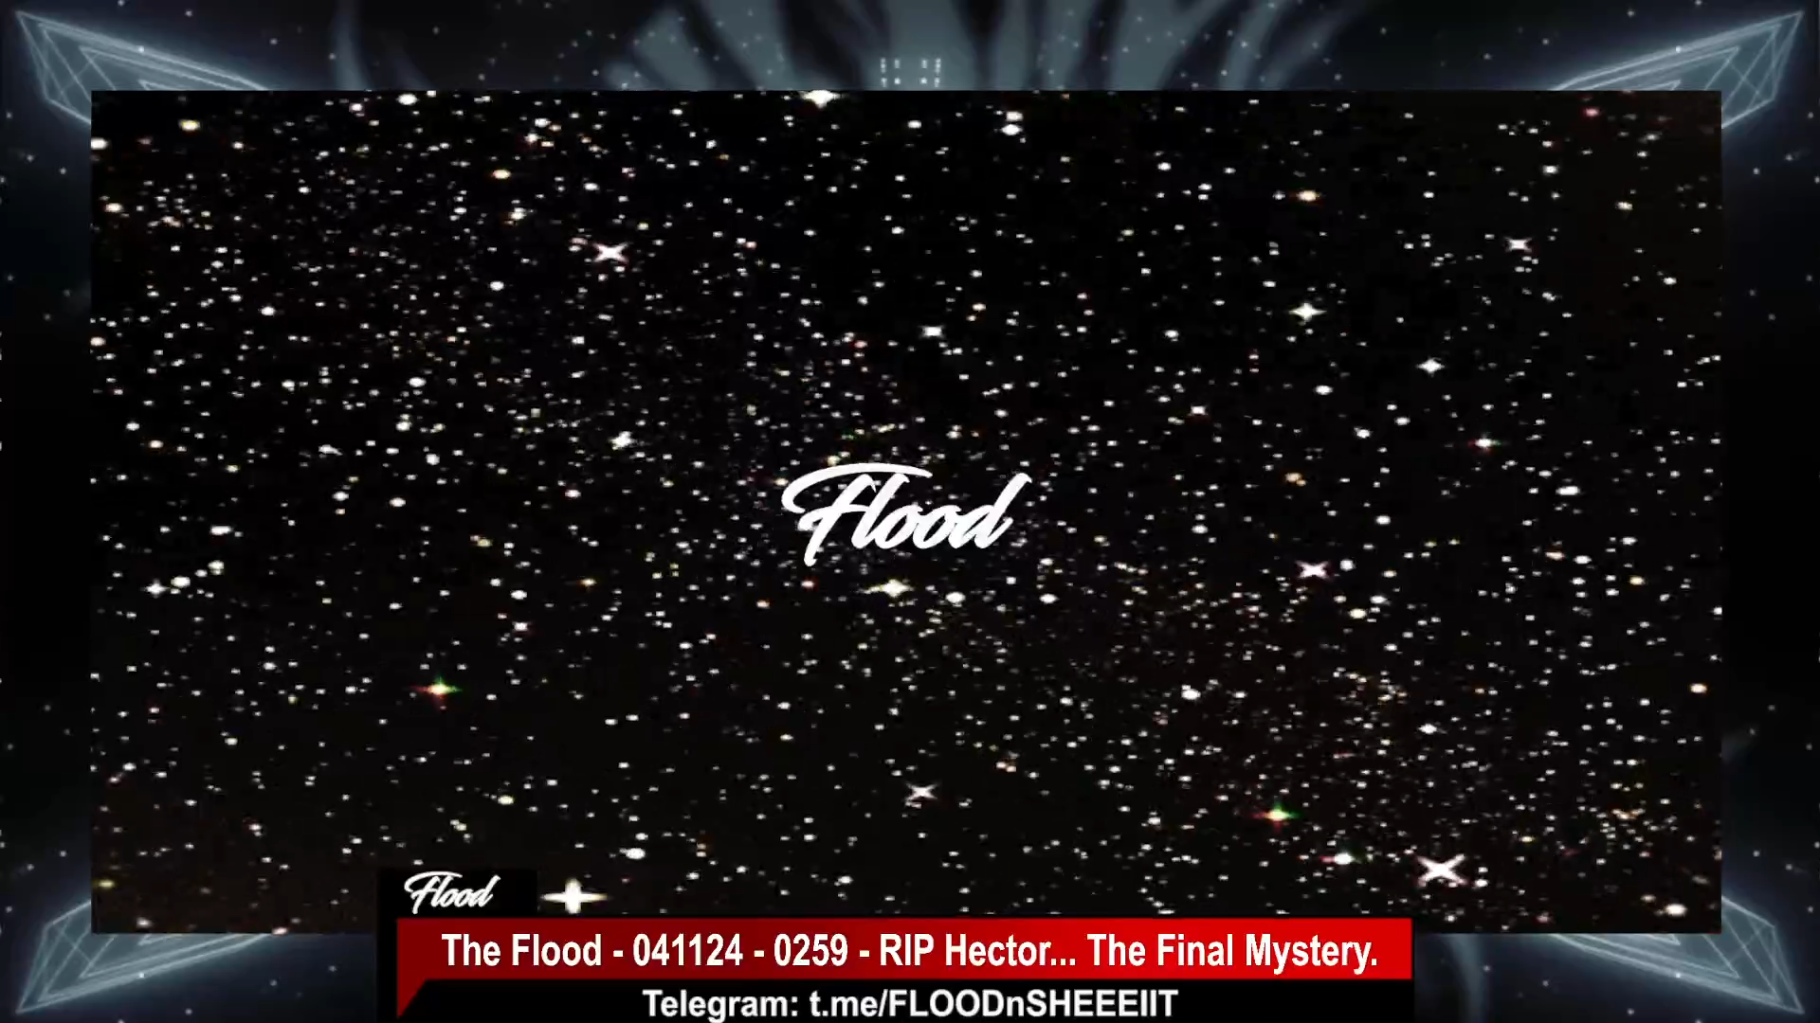 The Flood - 041124 - 0259 - RIP Hector... The Final Mystery.